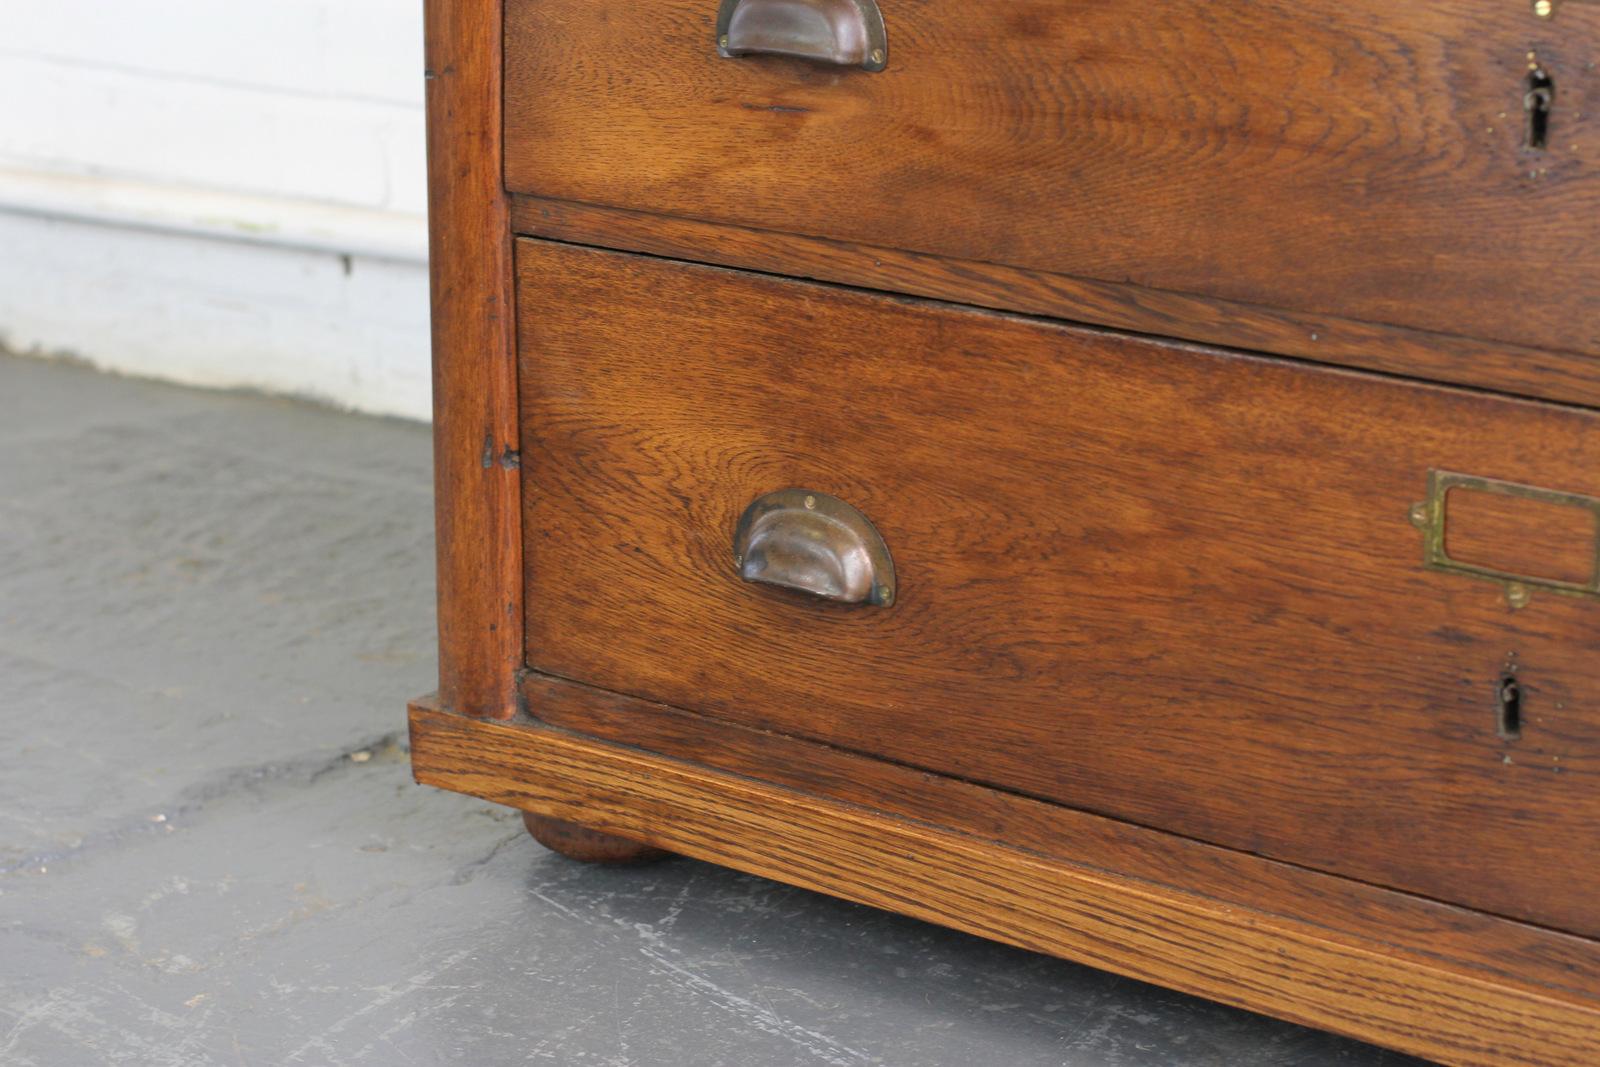 French 19th century oak drapers cabinet 

- Three gradiented drawers
- Solid oak drawers, top and sides
- Brass cup handles and card holders
- French, circa 1880s
- Measures: 122cm wide x 59cm deep x 82cm tall

Condition report

The